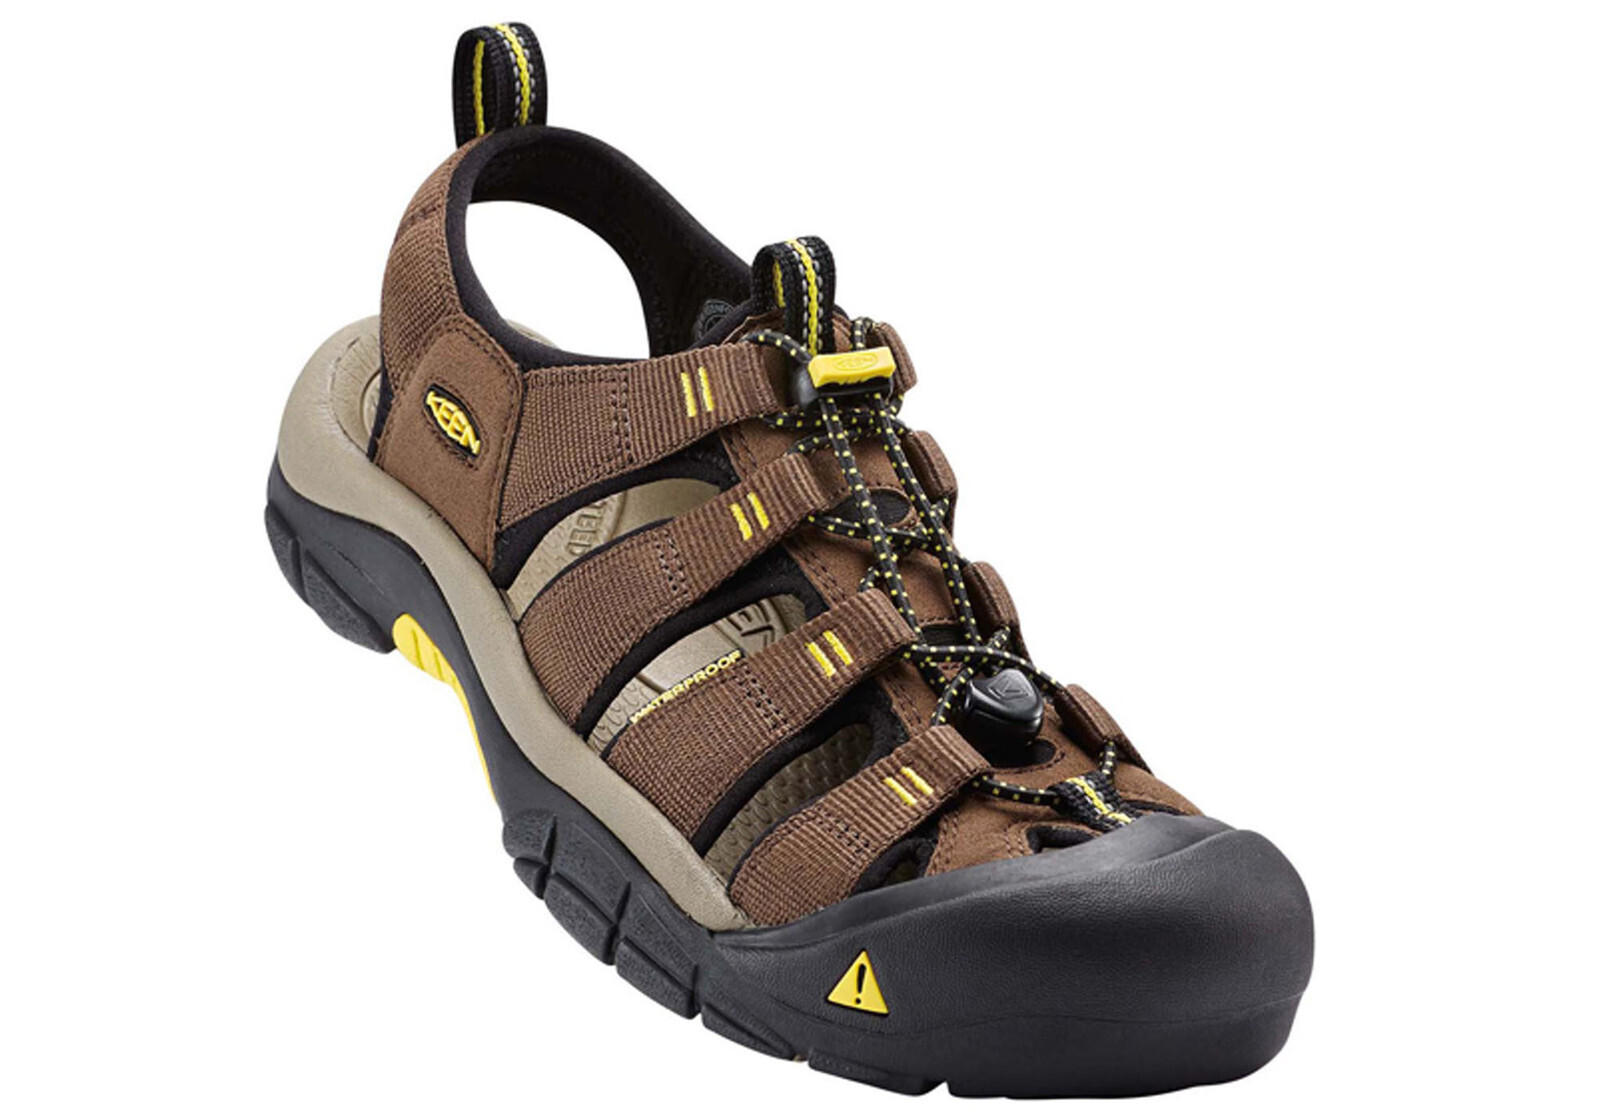 Hiking Shoes - Quality Camping Shoes from Top Brands